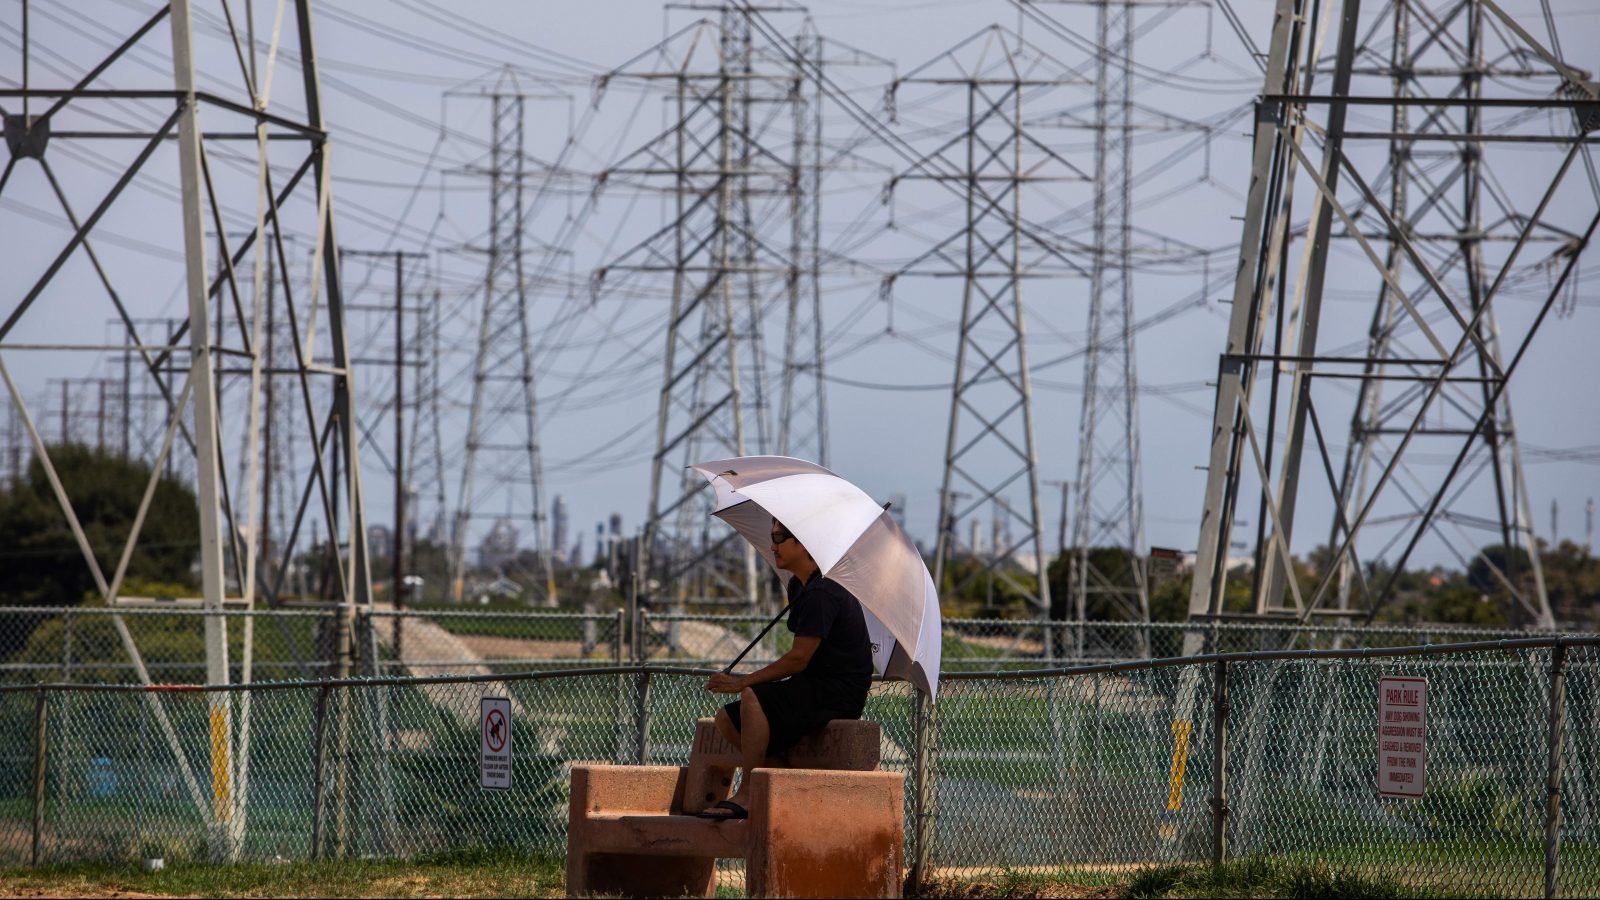 A man sits in the shade of his umbrella at the Dog Park under high tension power lines in Redondo Beach, California on August 16, 2020.